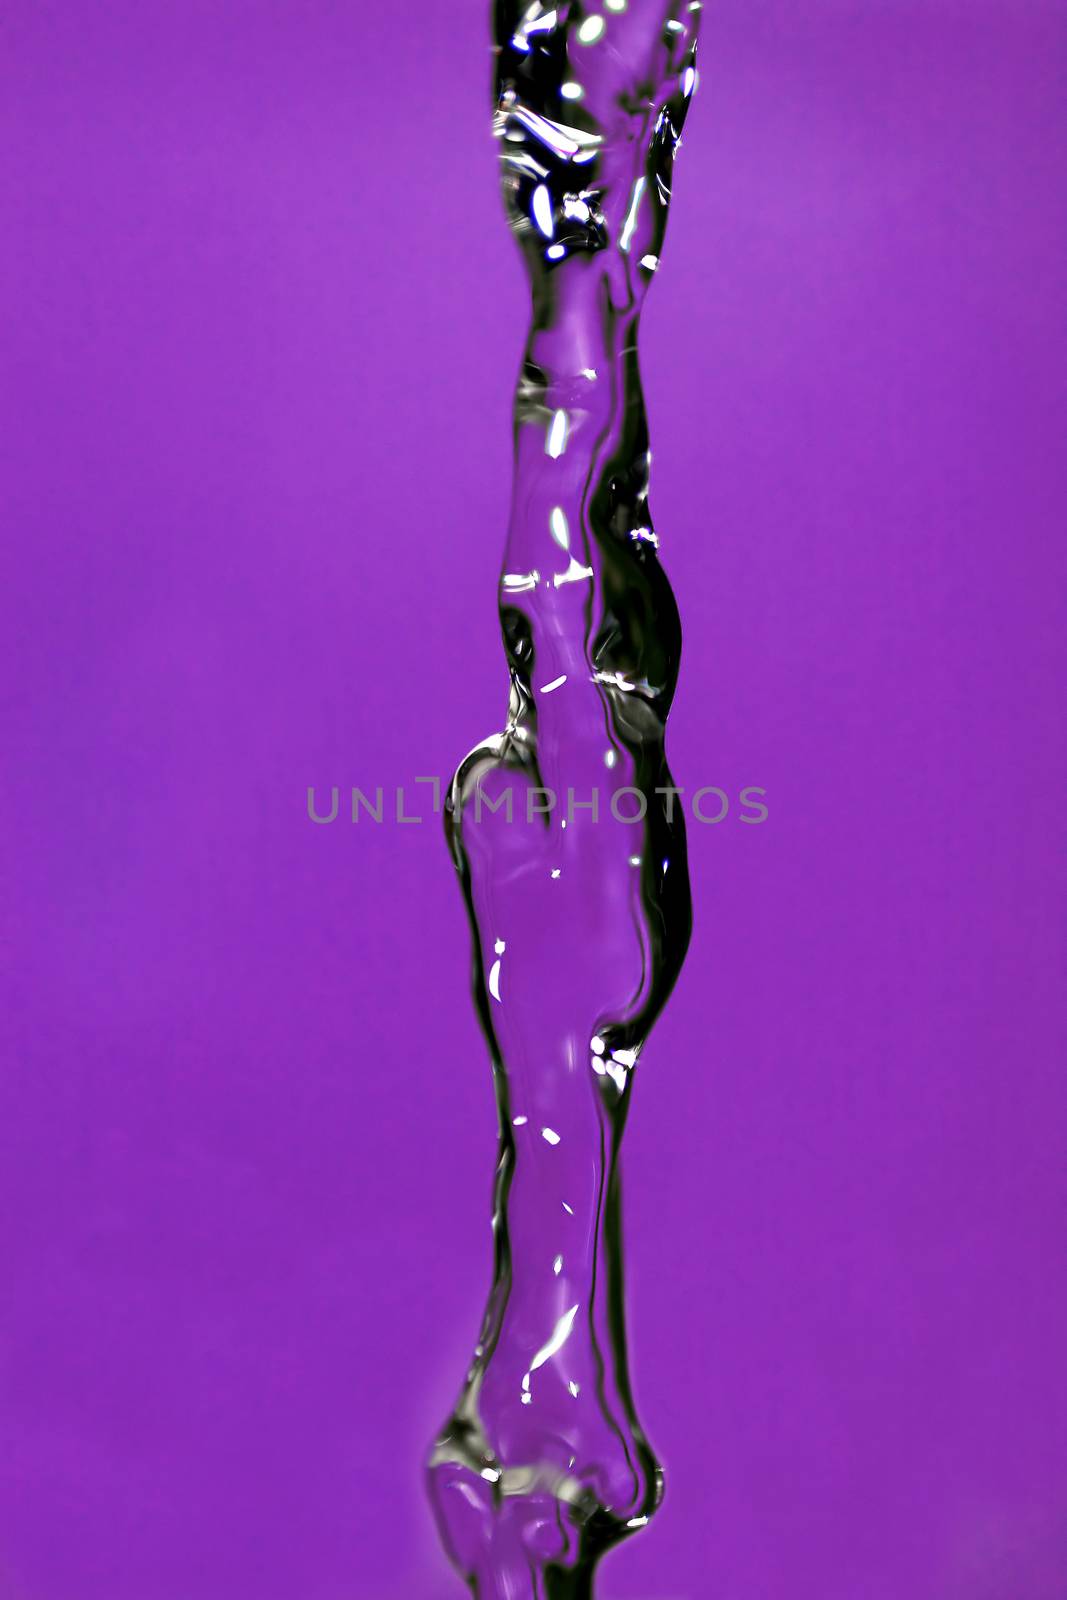 Water falling down, frozen in time with purple background.